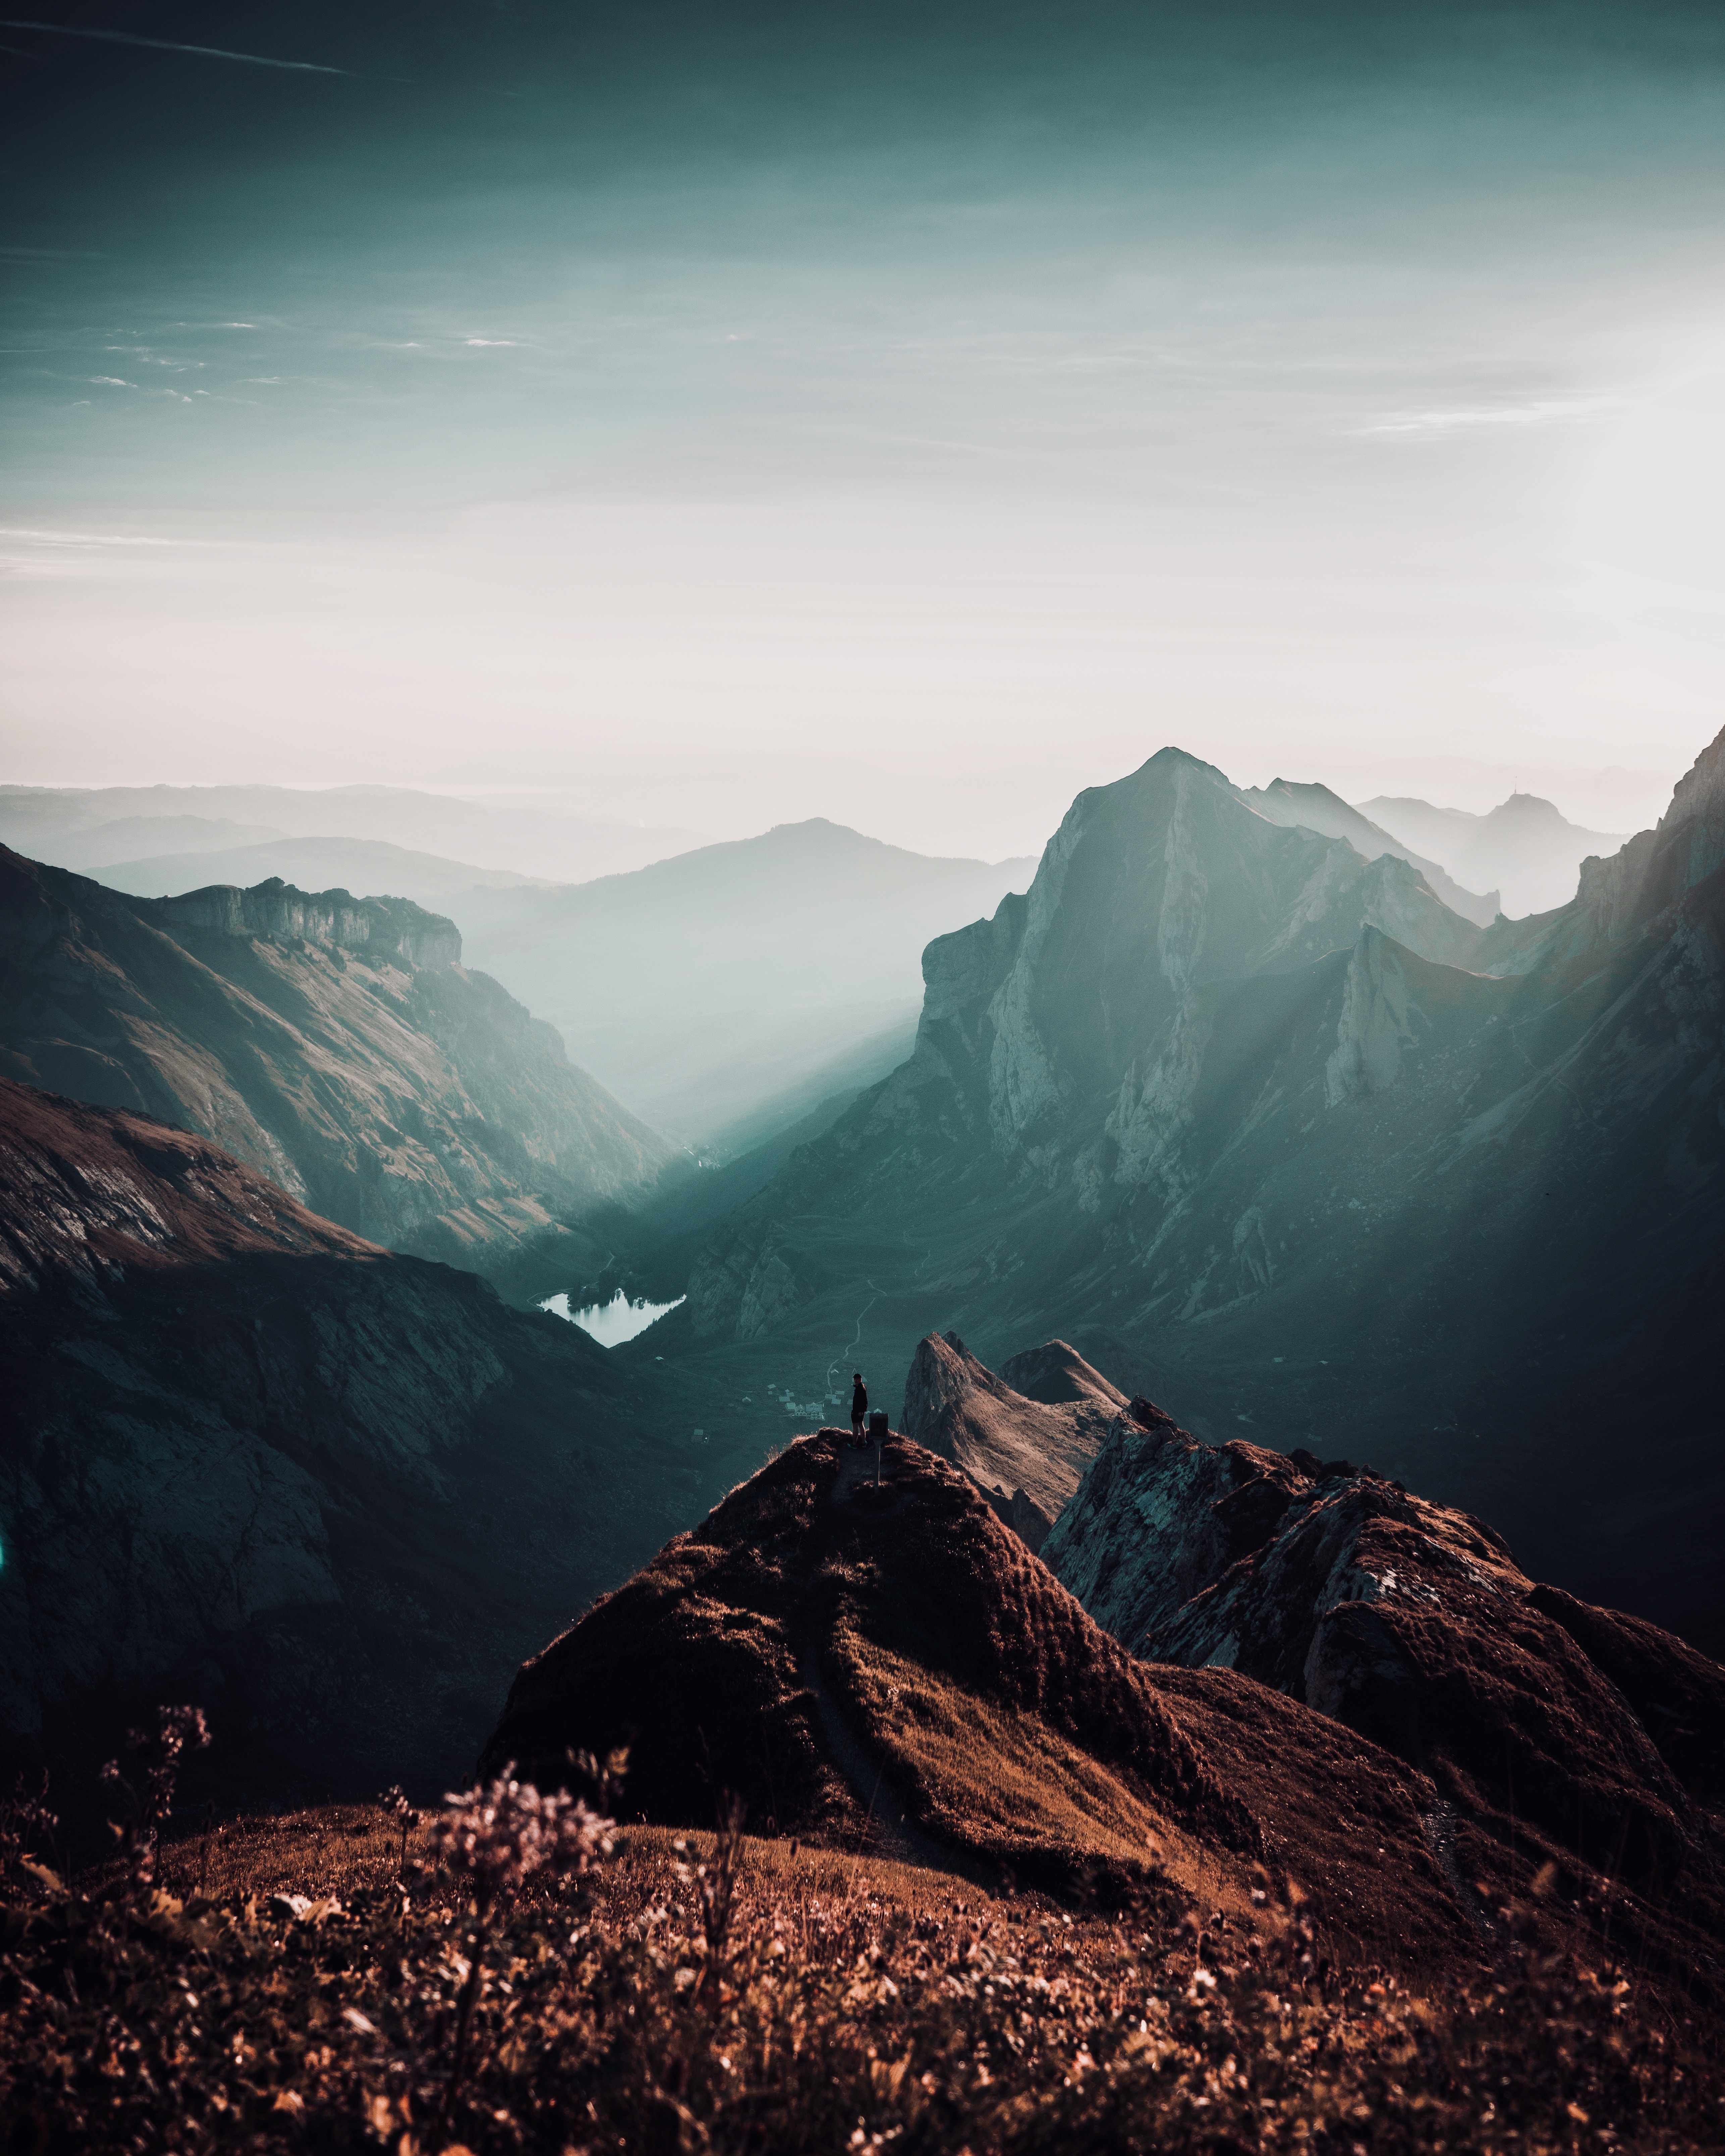 tops, loneliness, nature, privacy, mountains, vertex, seclusion, switzerland